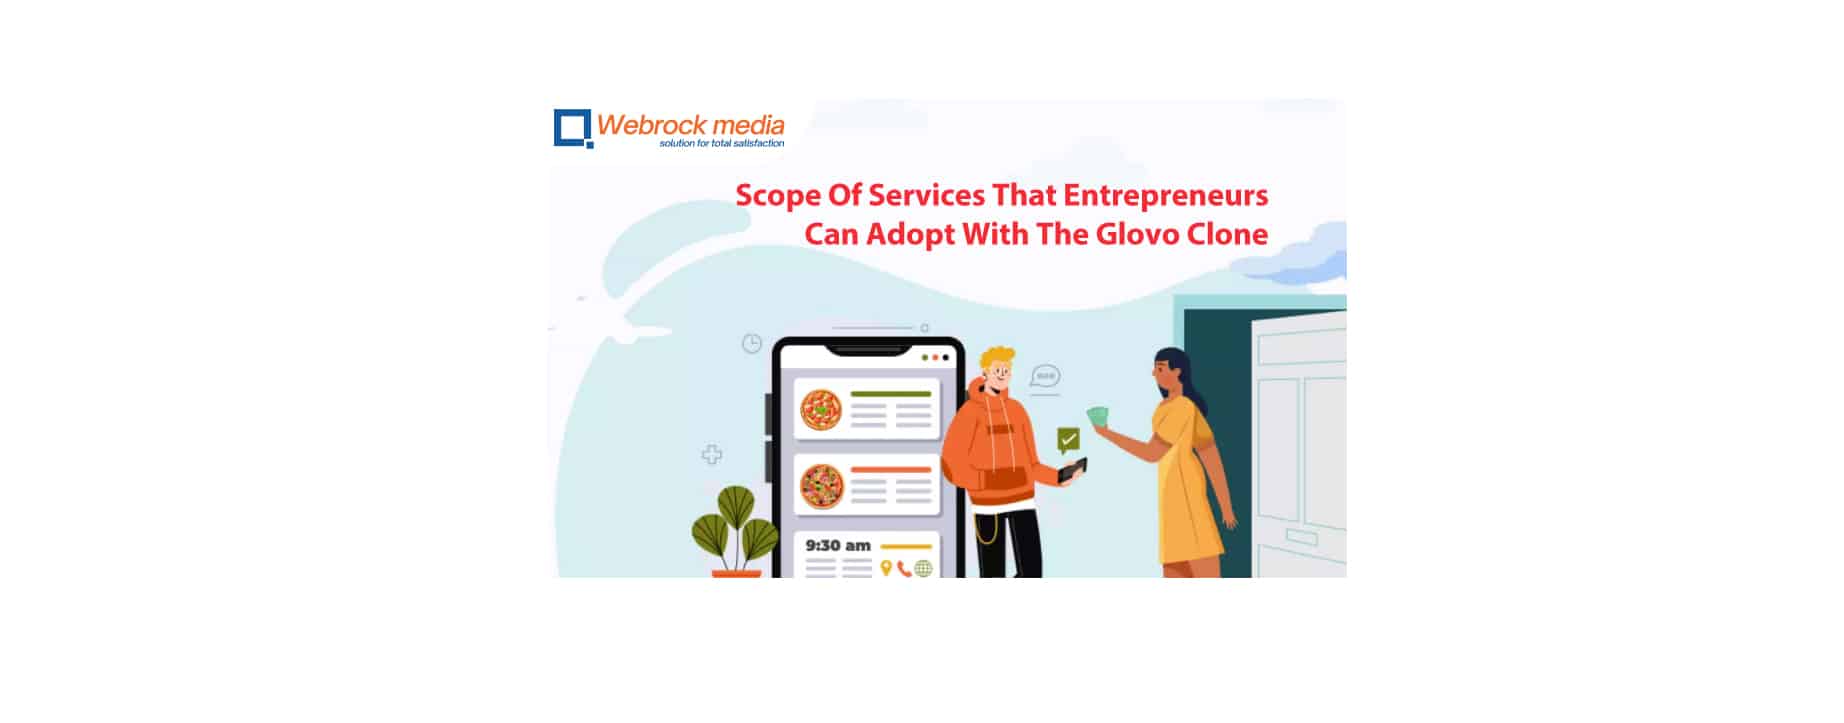 Scope Of Services That Entrepreneurs Can Adopt With The Glovo Clone